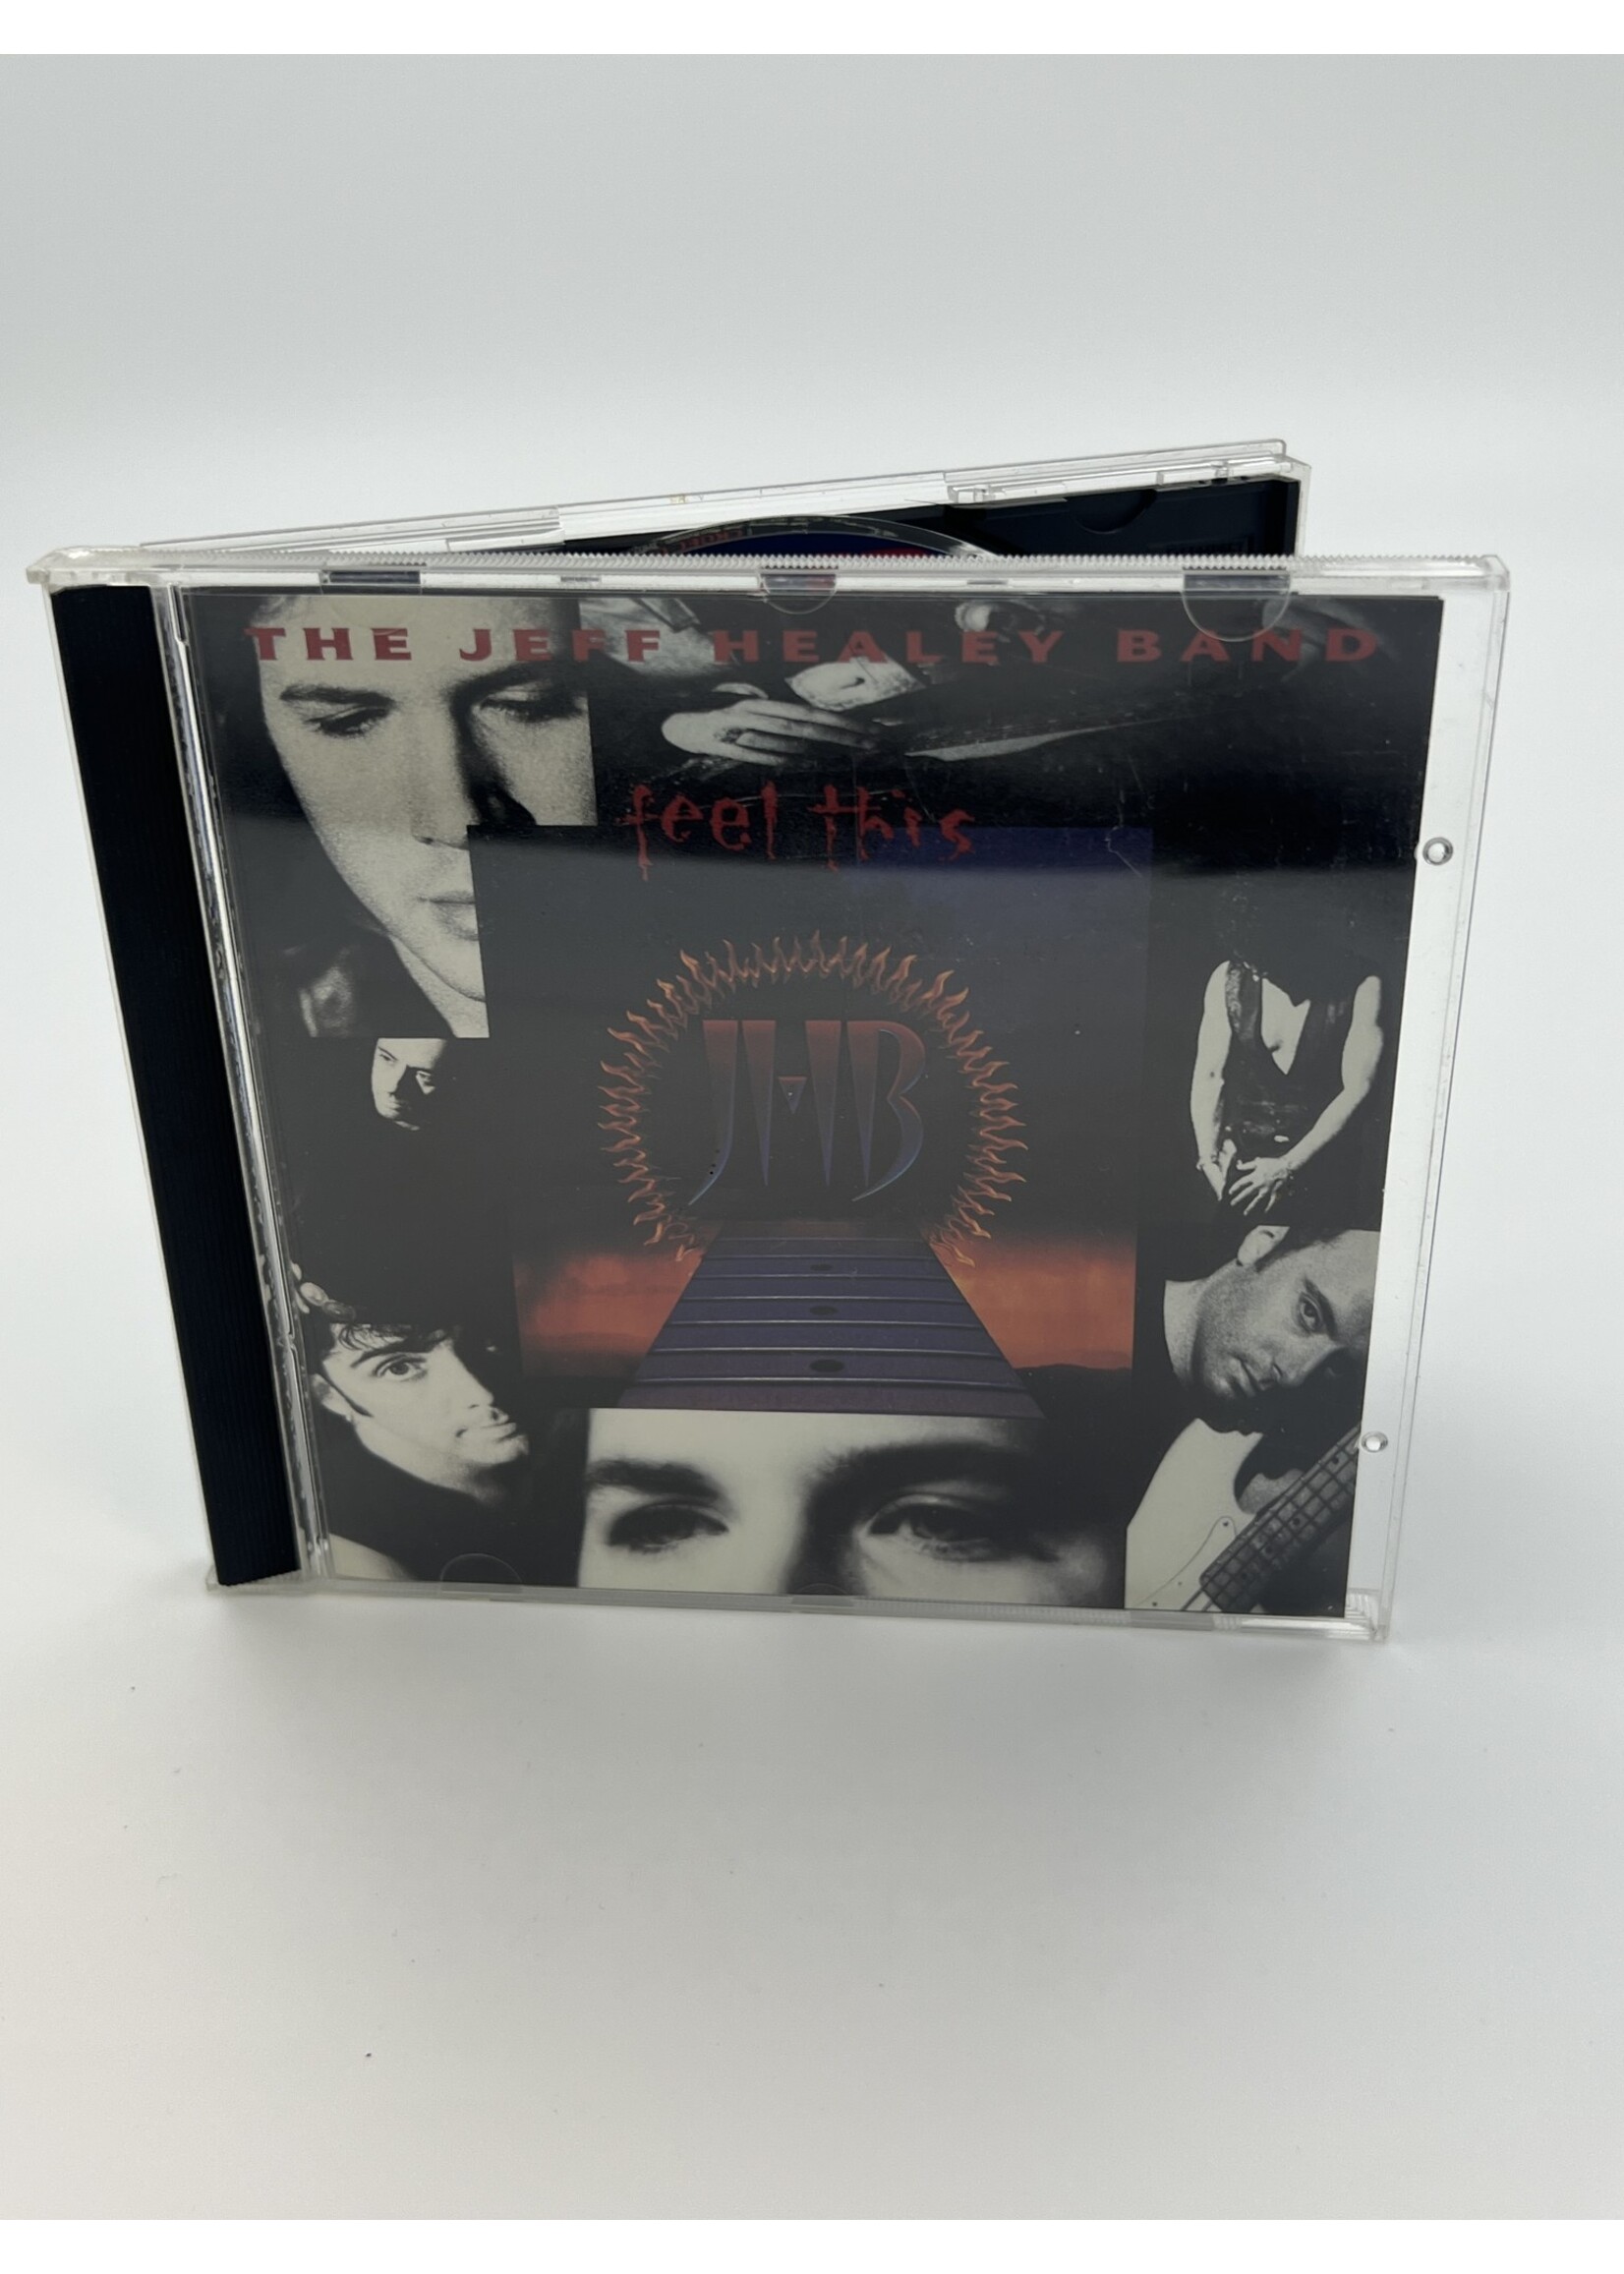 CD   The Jeff Healey Band Feel This CD